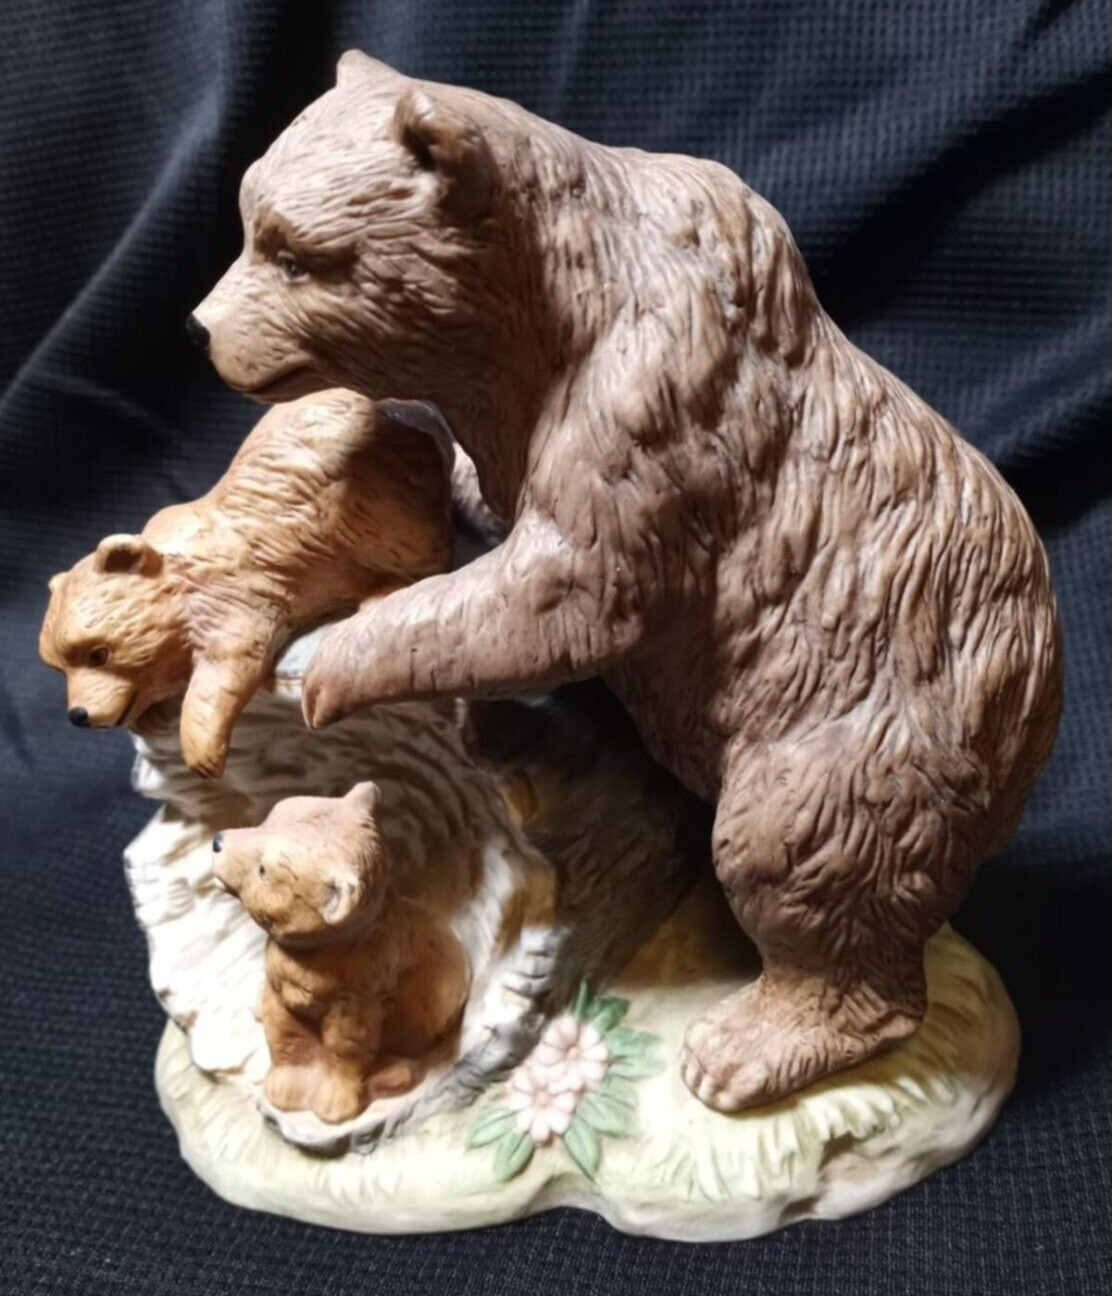 Home Interiors & Gifts Curious Cubs Porcelain Brown Bears #1435 